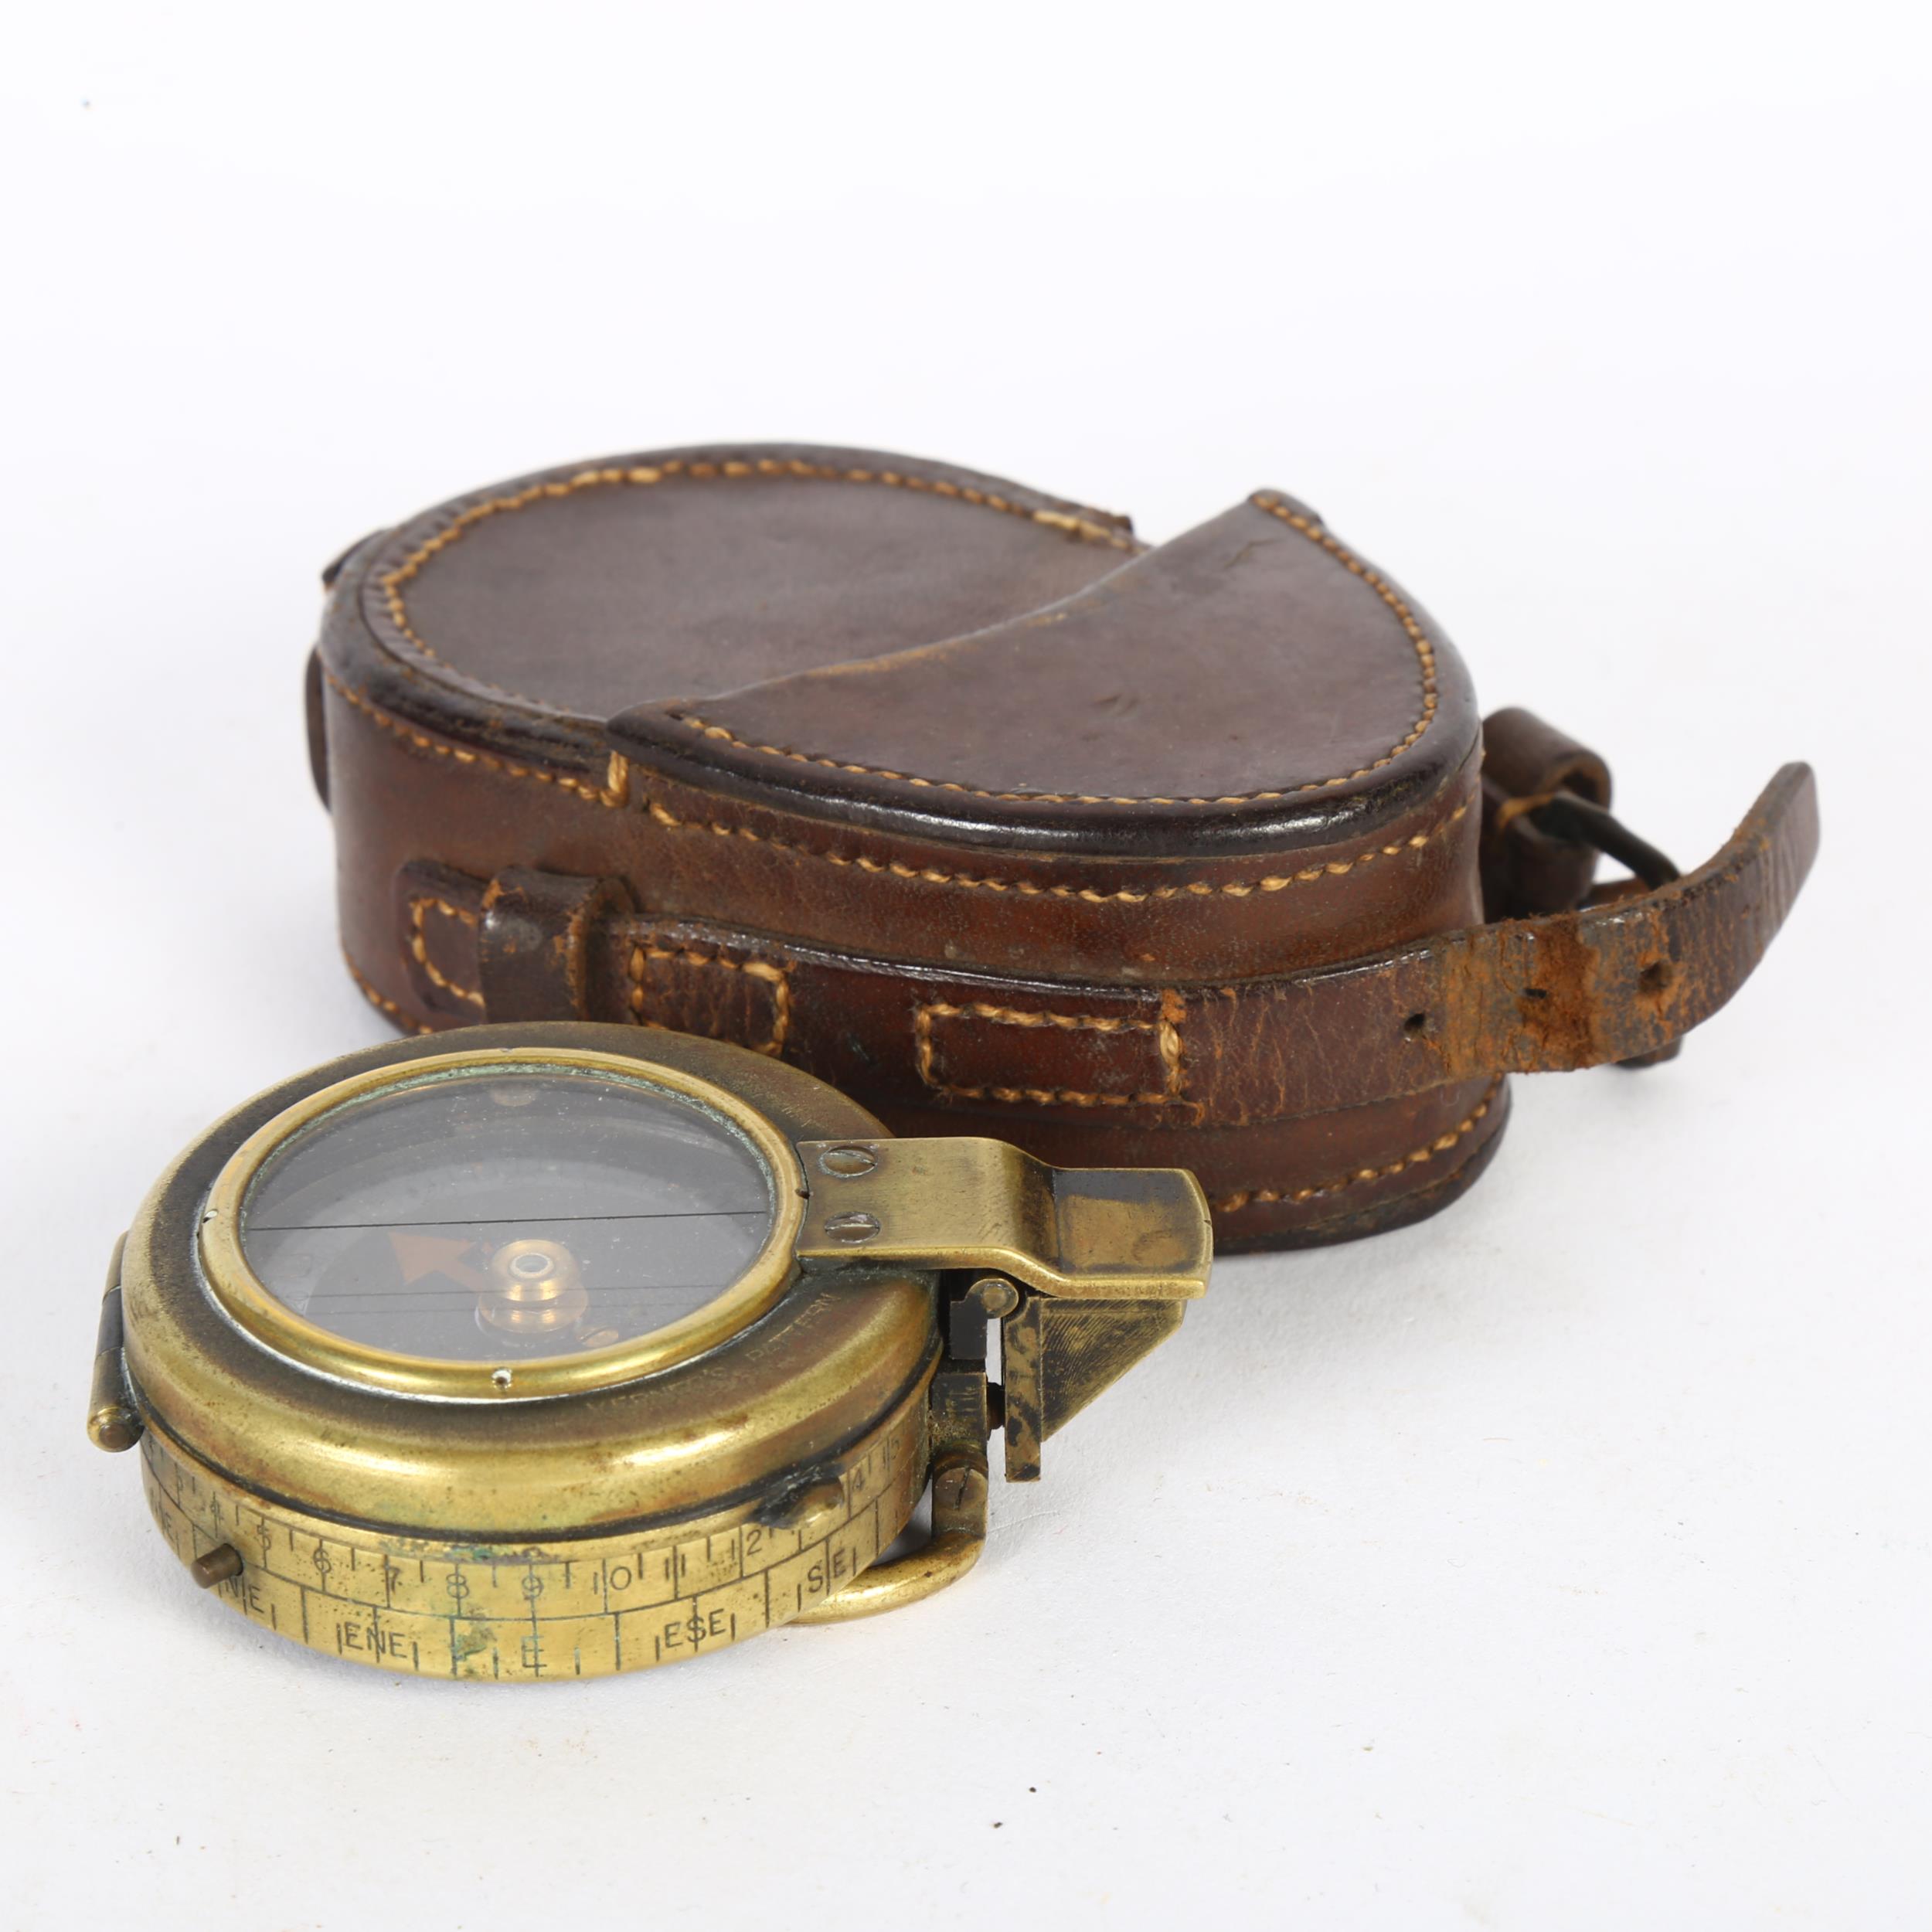 A First World War military compass, Verner's Patent, dated 1918, no. 148188 - Image 2 of 2